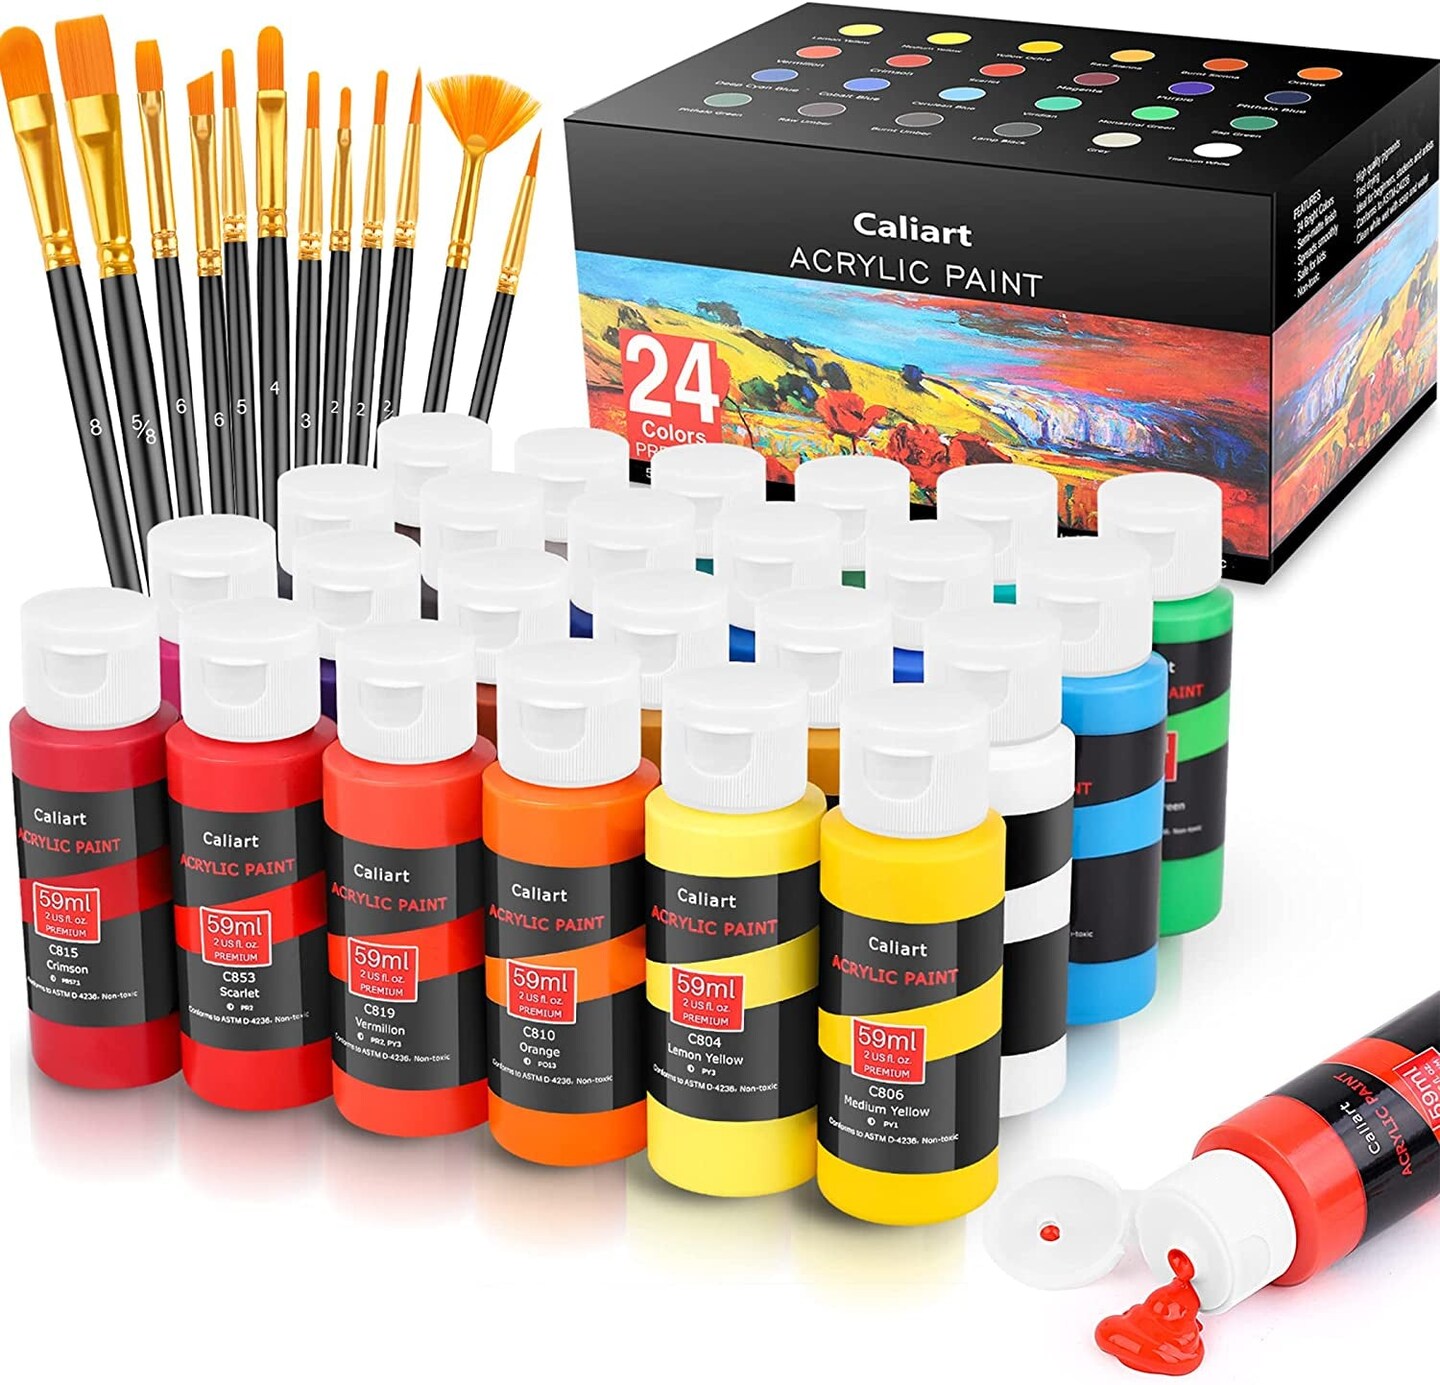 Paints for Canvases Acrylic Paint Set Upgrade Painting Supplies